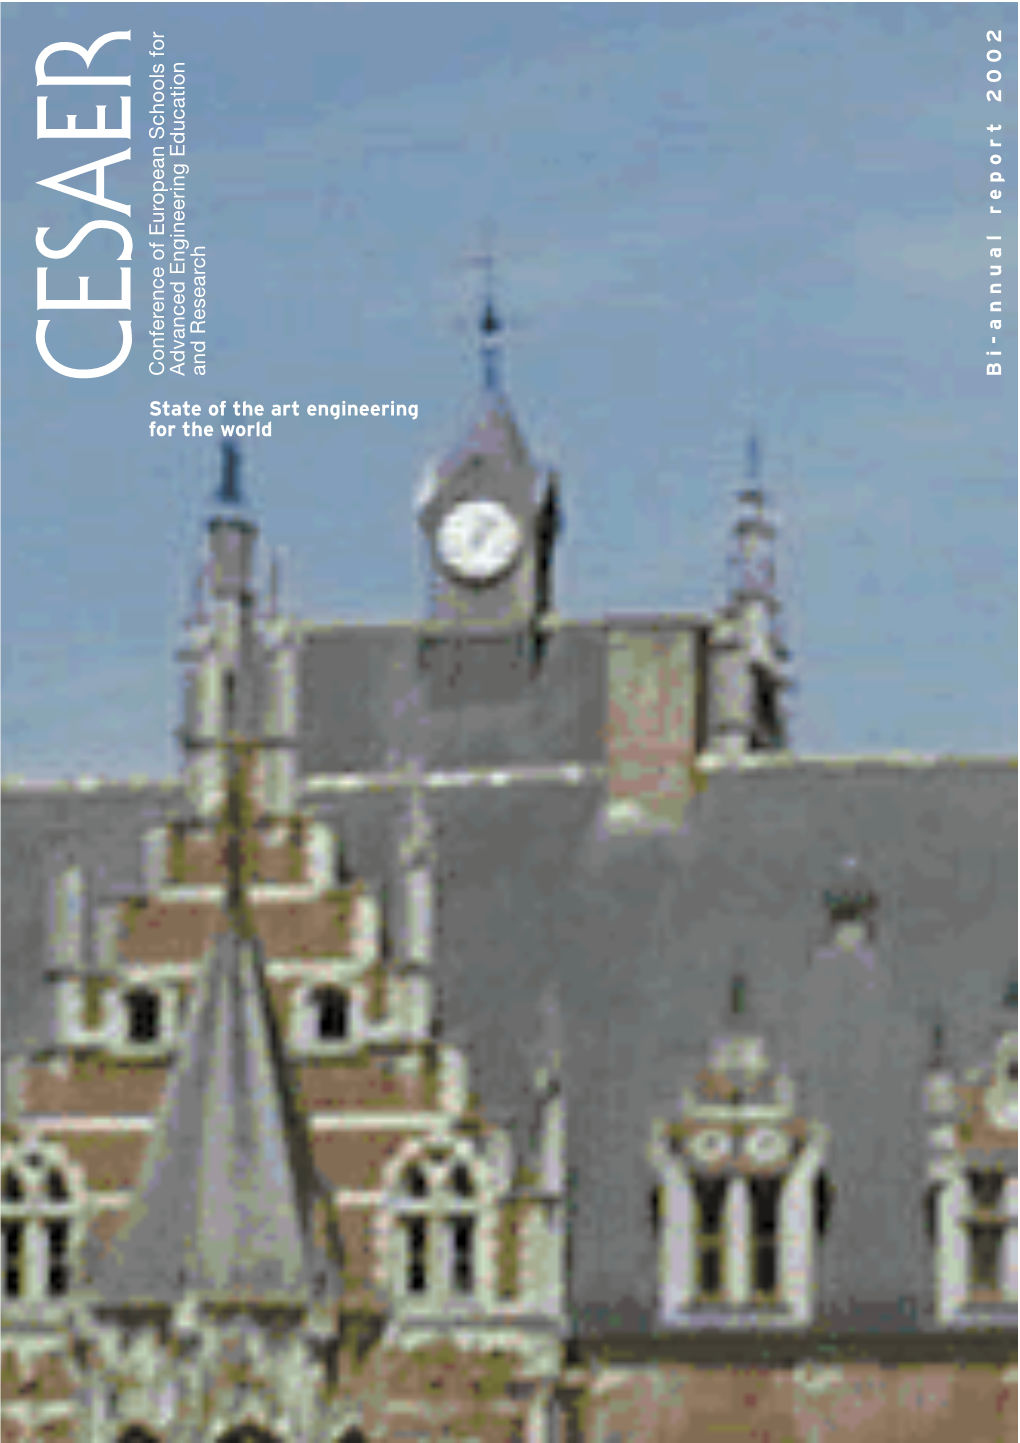 Conference of European Schools for Advanced Engineering Education and Research